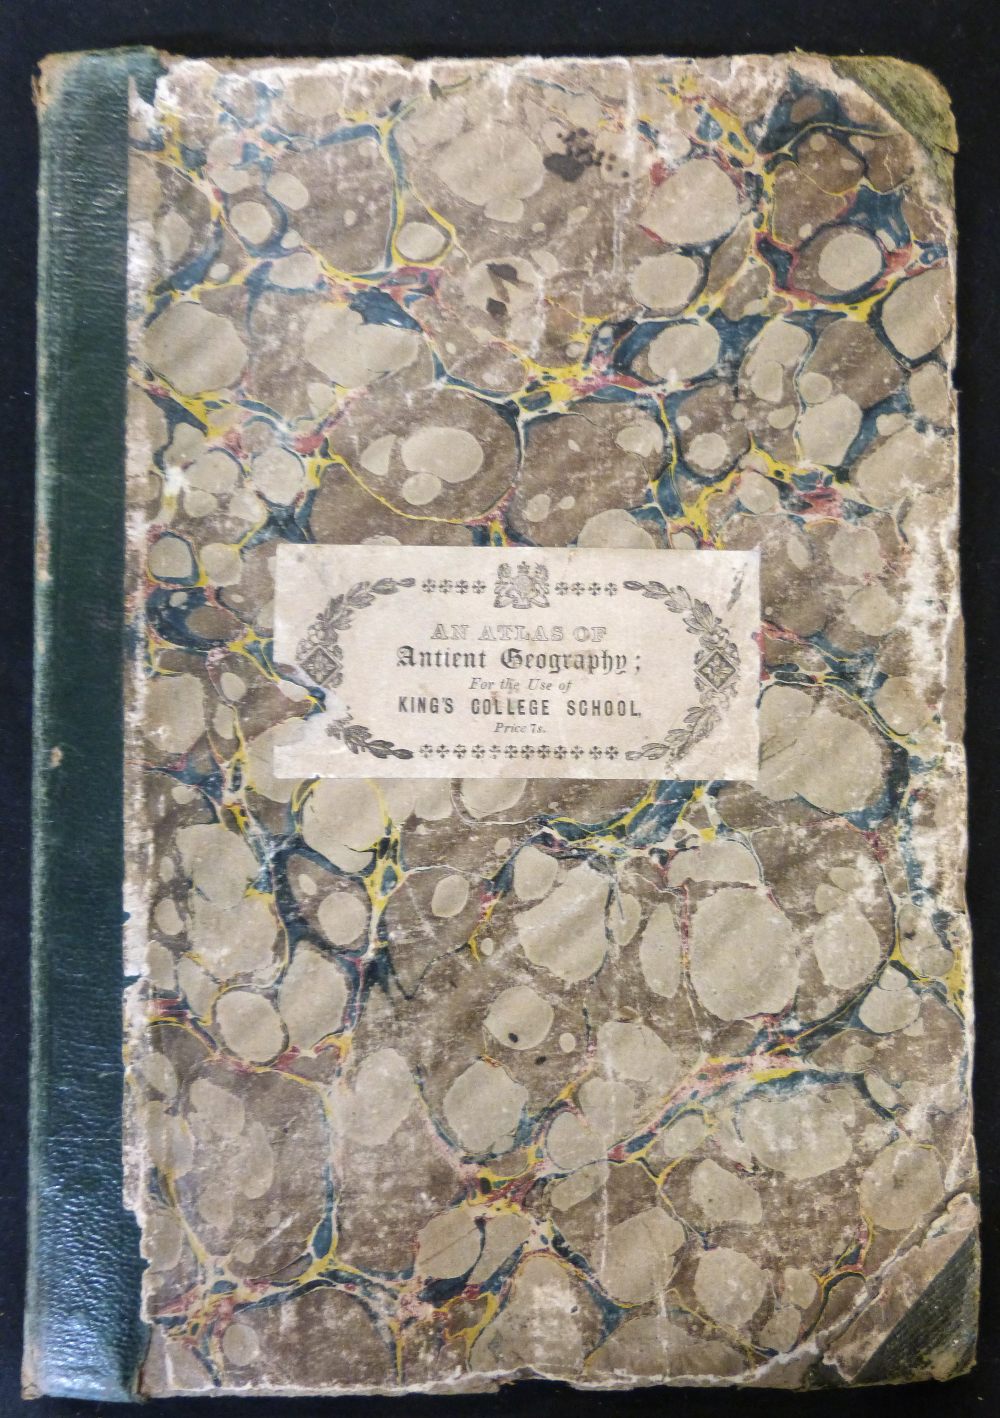 AARON ARROWSMITH: AN ATLAS OF ANCIENT GEOGRAPHY FOR THE USE OF KINGS COLLEGE SCHOOL, ill J